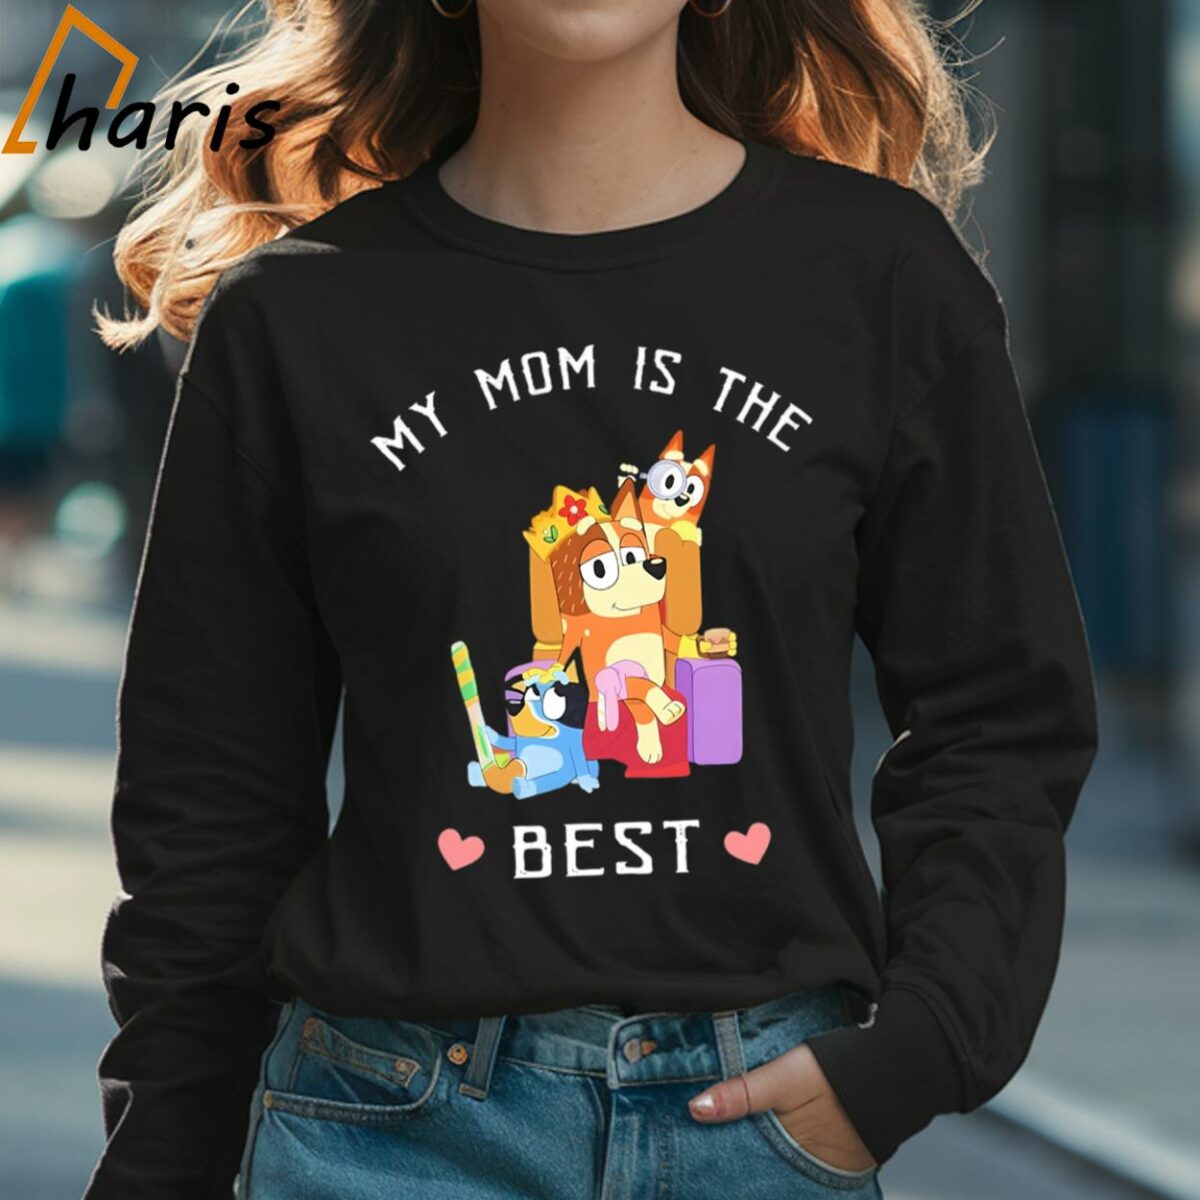 My Mom Is The Best Shirt 3 Long sleeve shirt